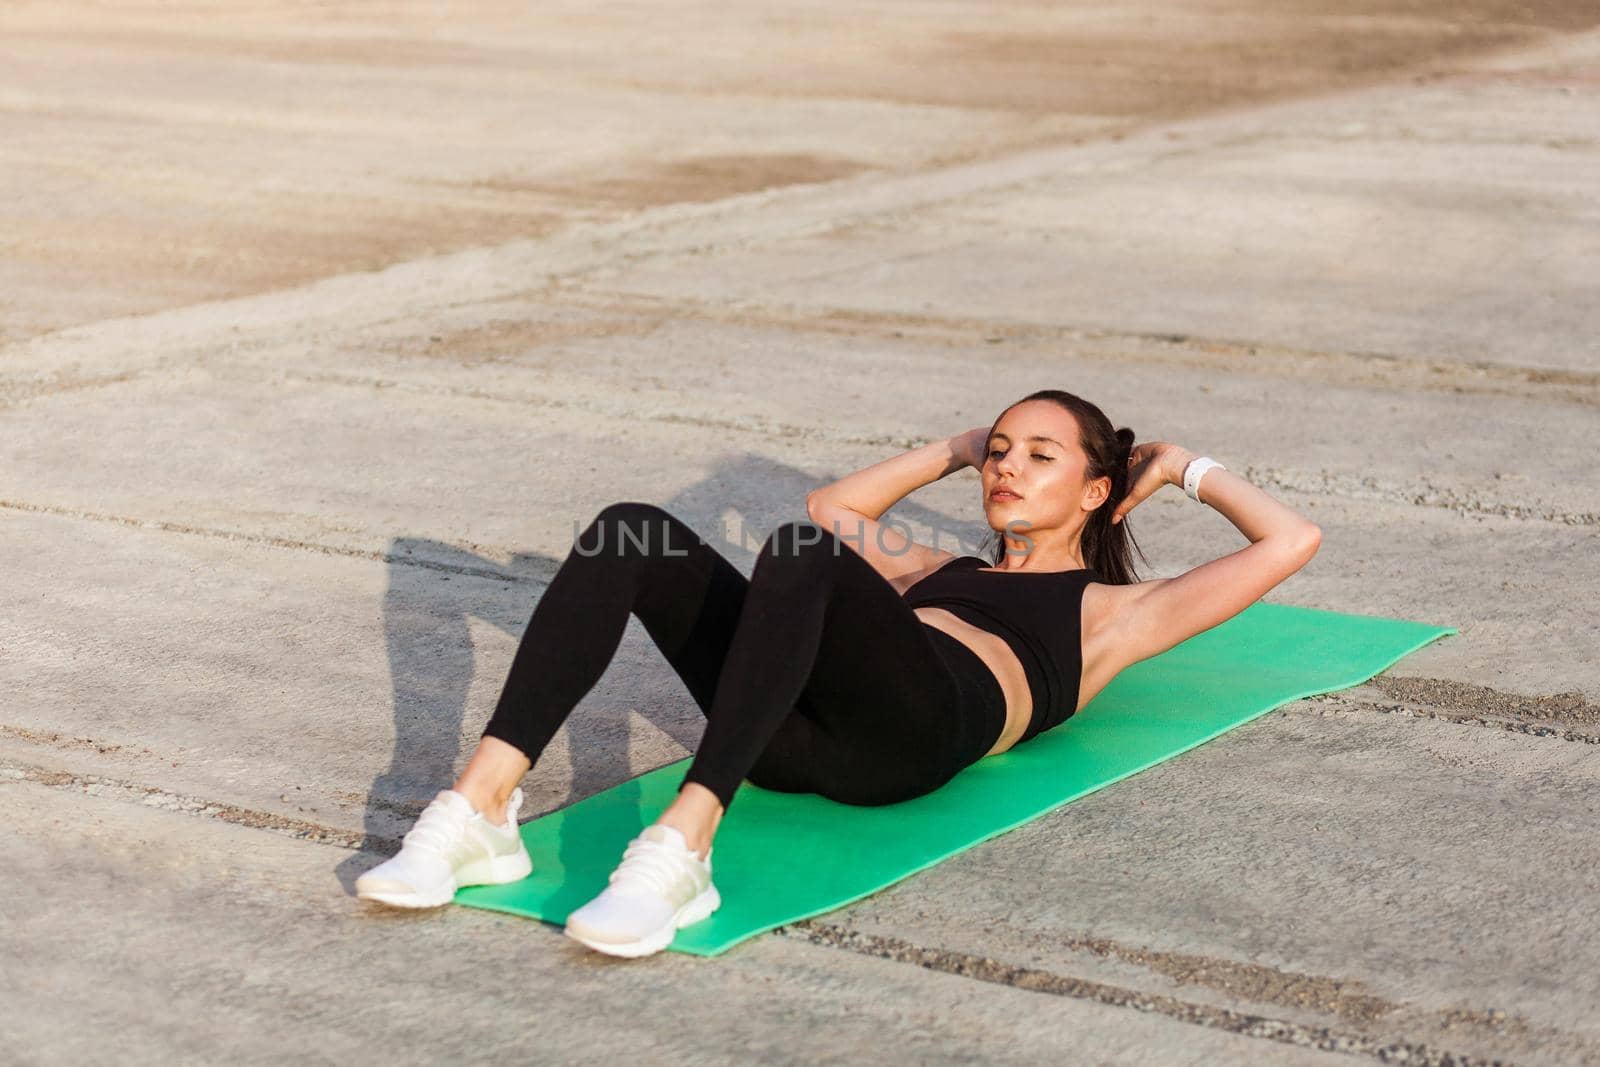 Athletic fit young woman in tight sportswear, black pants and top, lying on mat doing sit ups, crunch exercise, training abdominal muscles. Health care and weight loss concept, sport activity outdoor